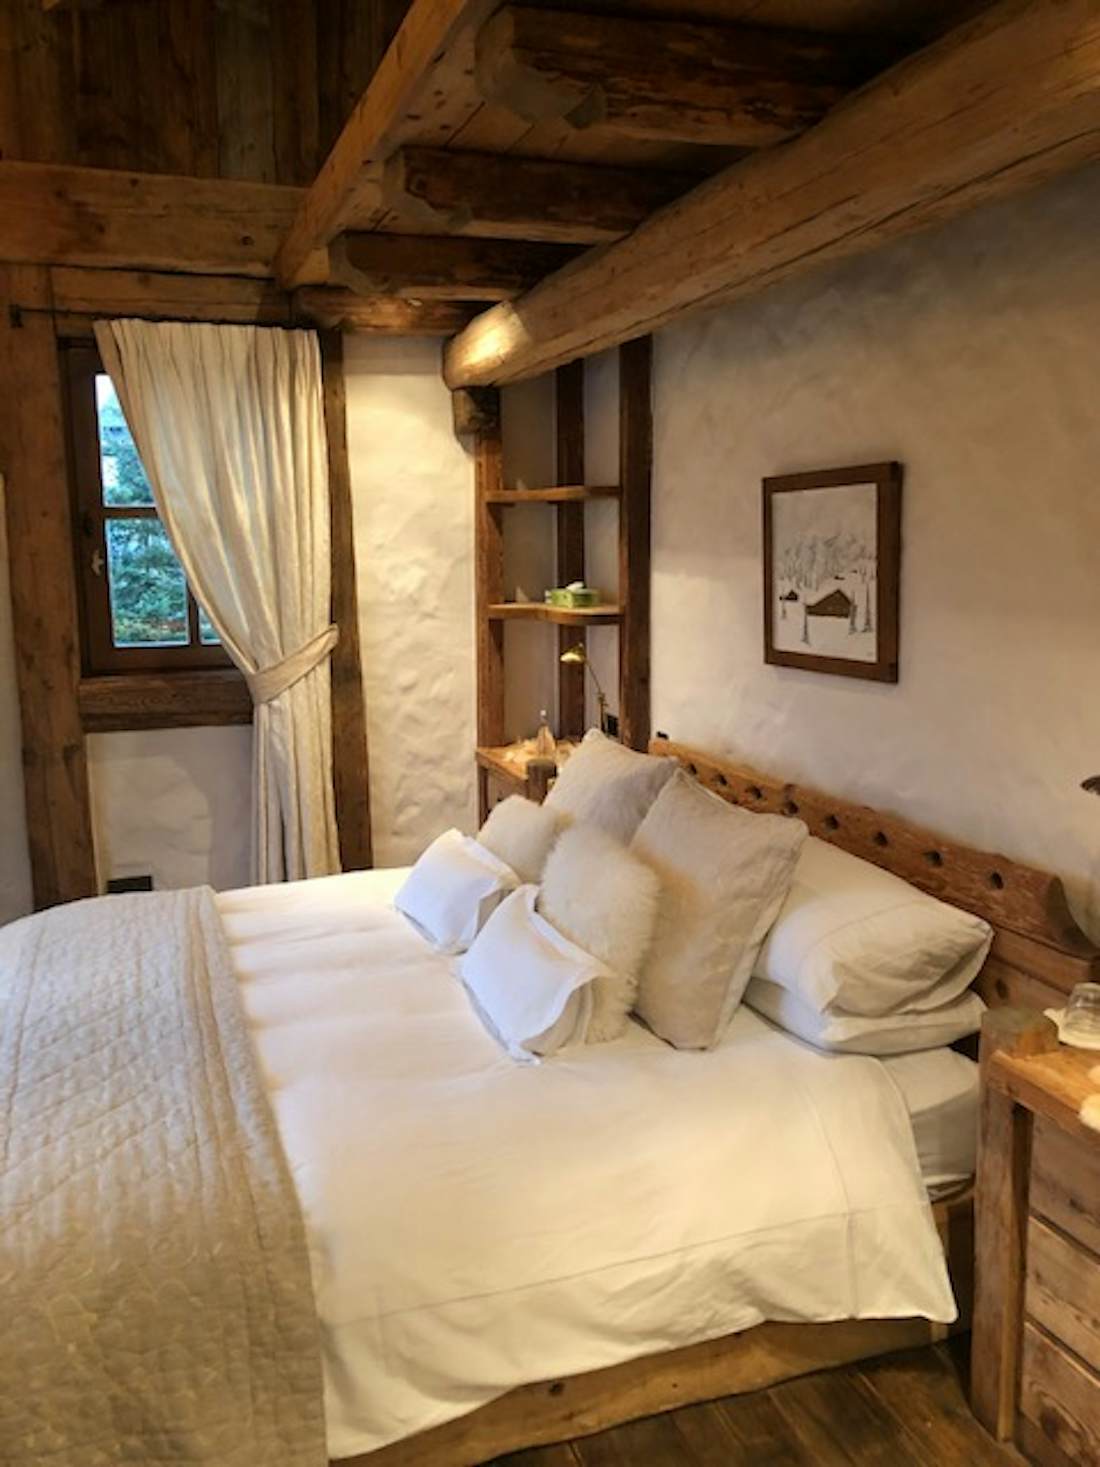 Accommodation - Megeve - Chalet Dabema - Bedrooms 4-5 - 3/4